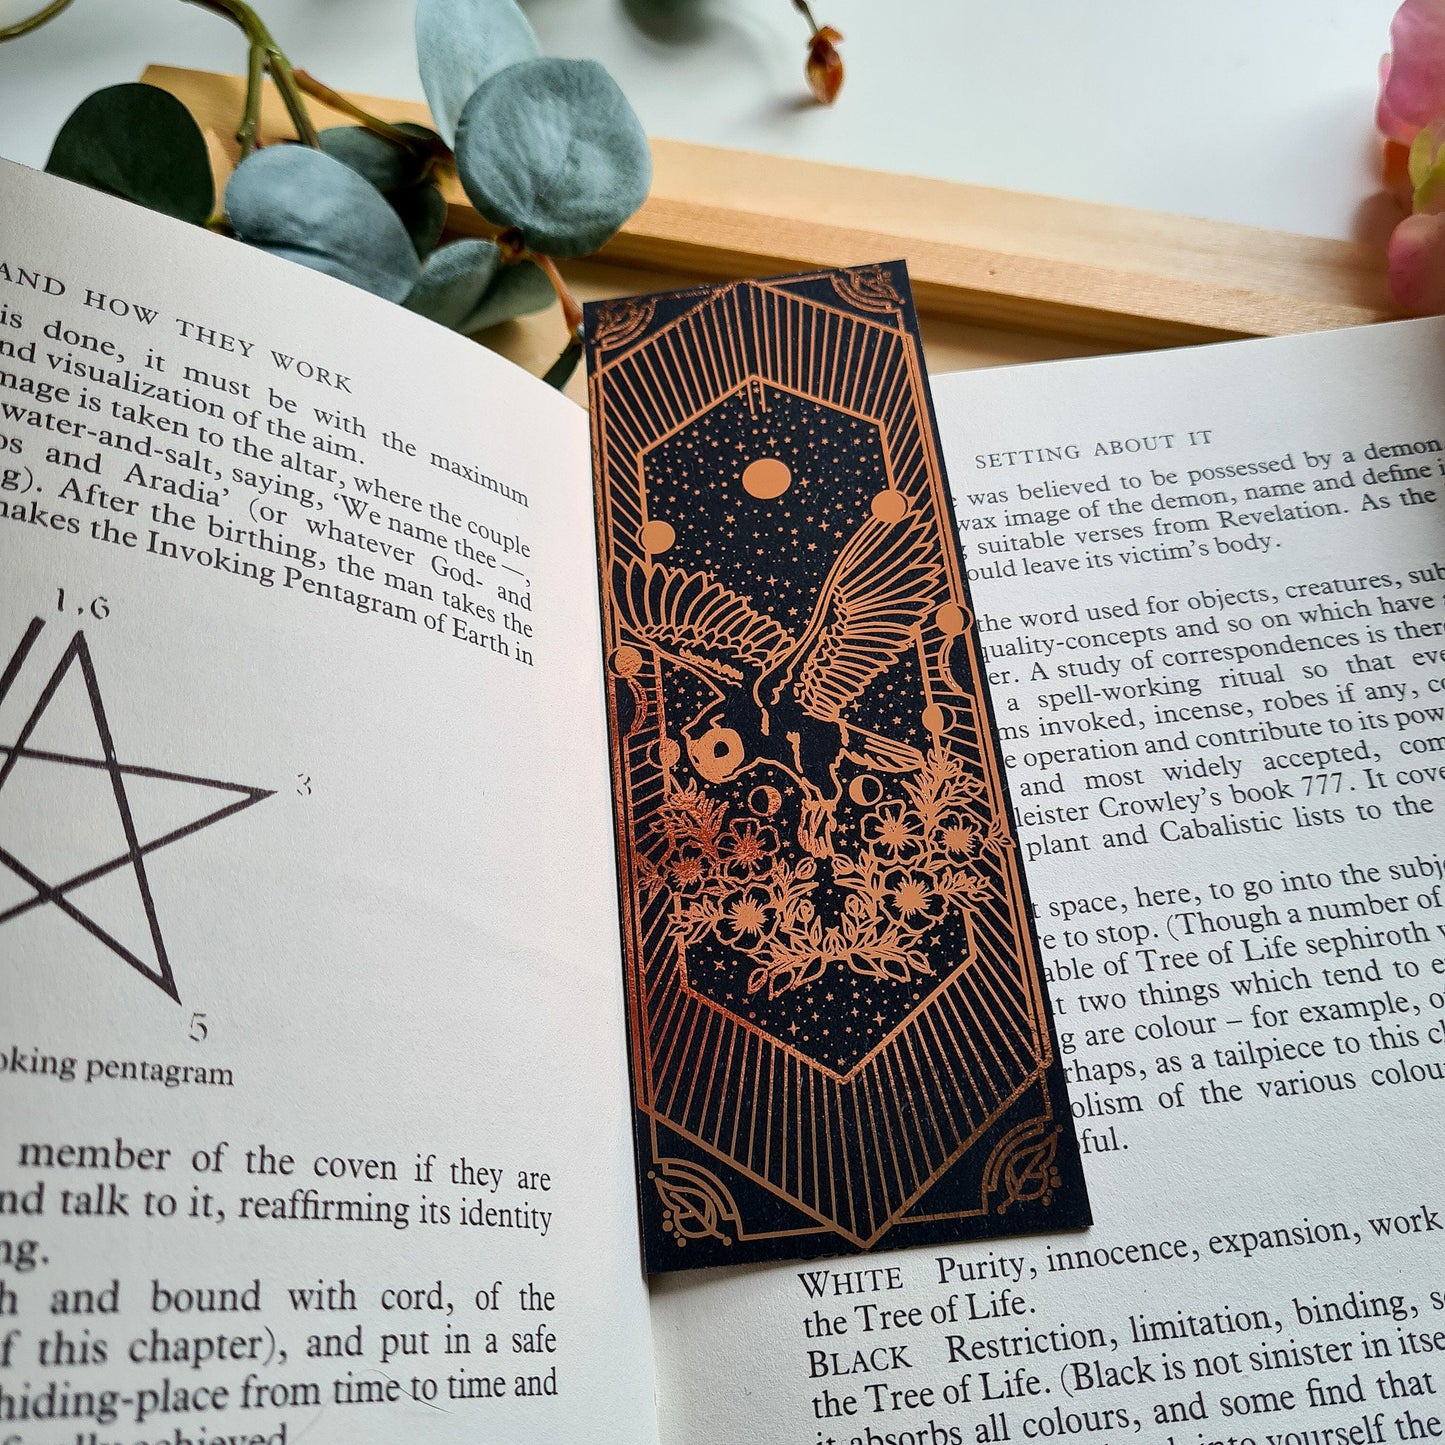 Celestial Fox Bookmark - Gold foil witchy bookmark